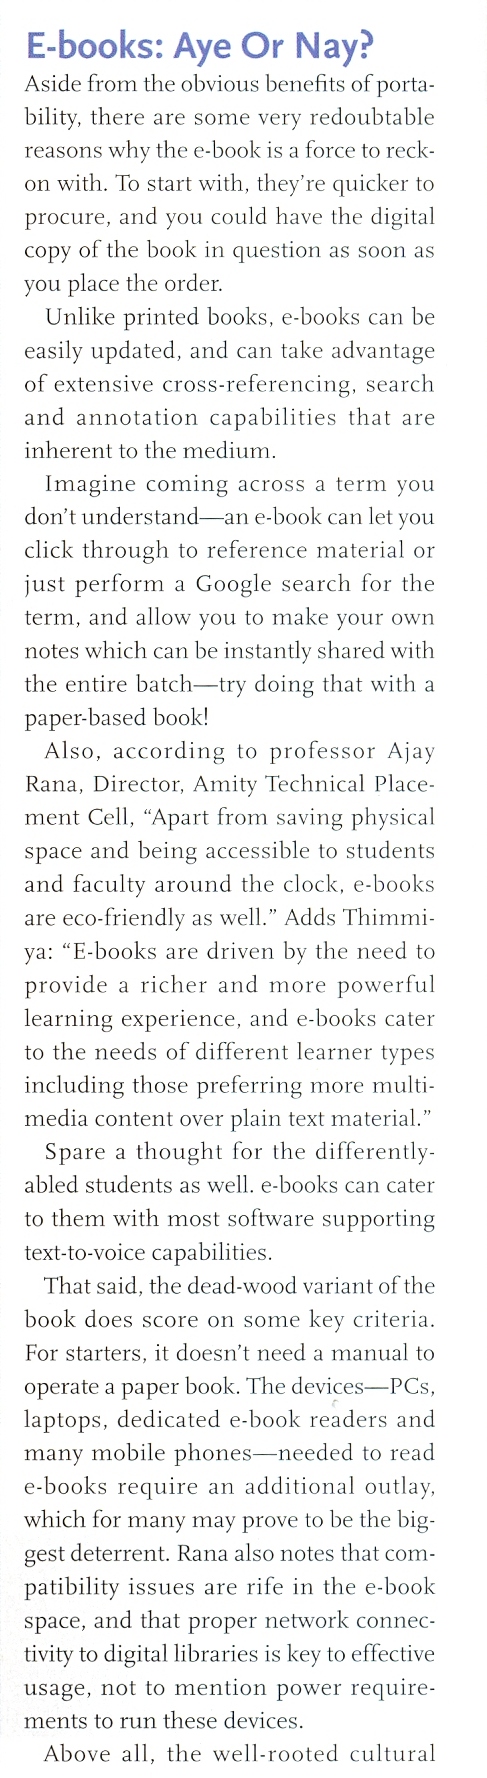 Technology E-Books - quote of Dr. Ajay Rana, Director - Amity Technical Placement Cell